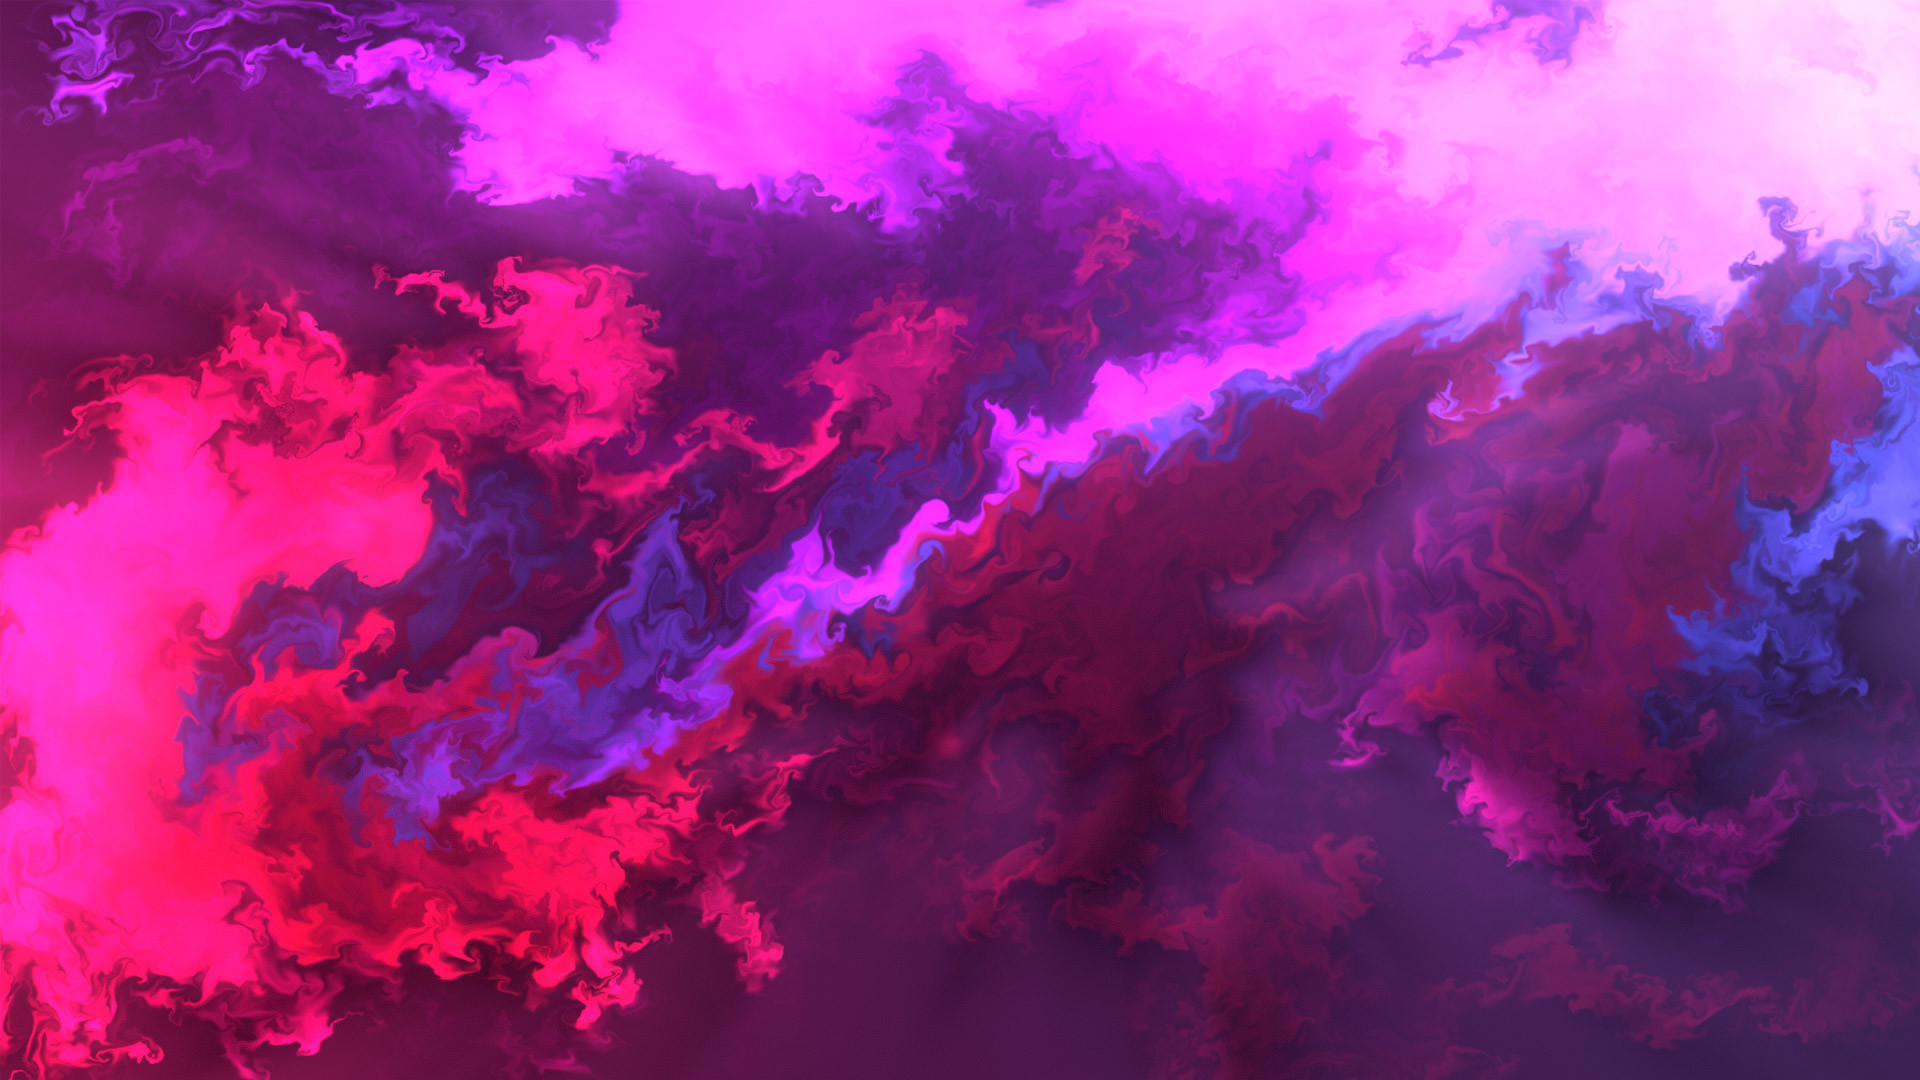 4K Liquid Color Wallpaper HD:Amazon.co.uk:Appstore for Android